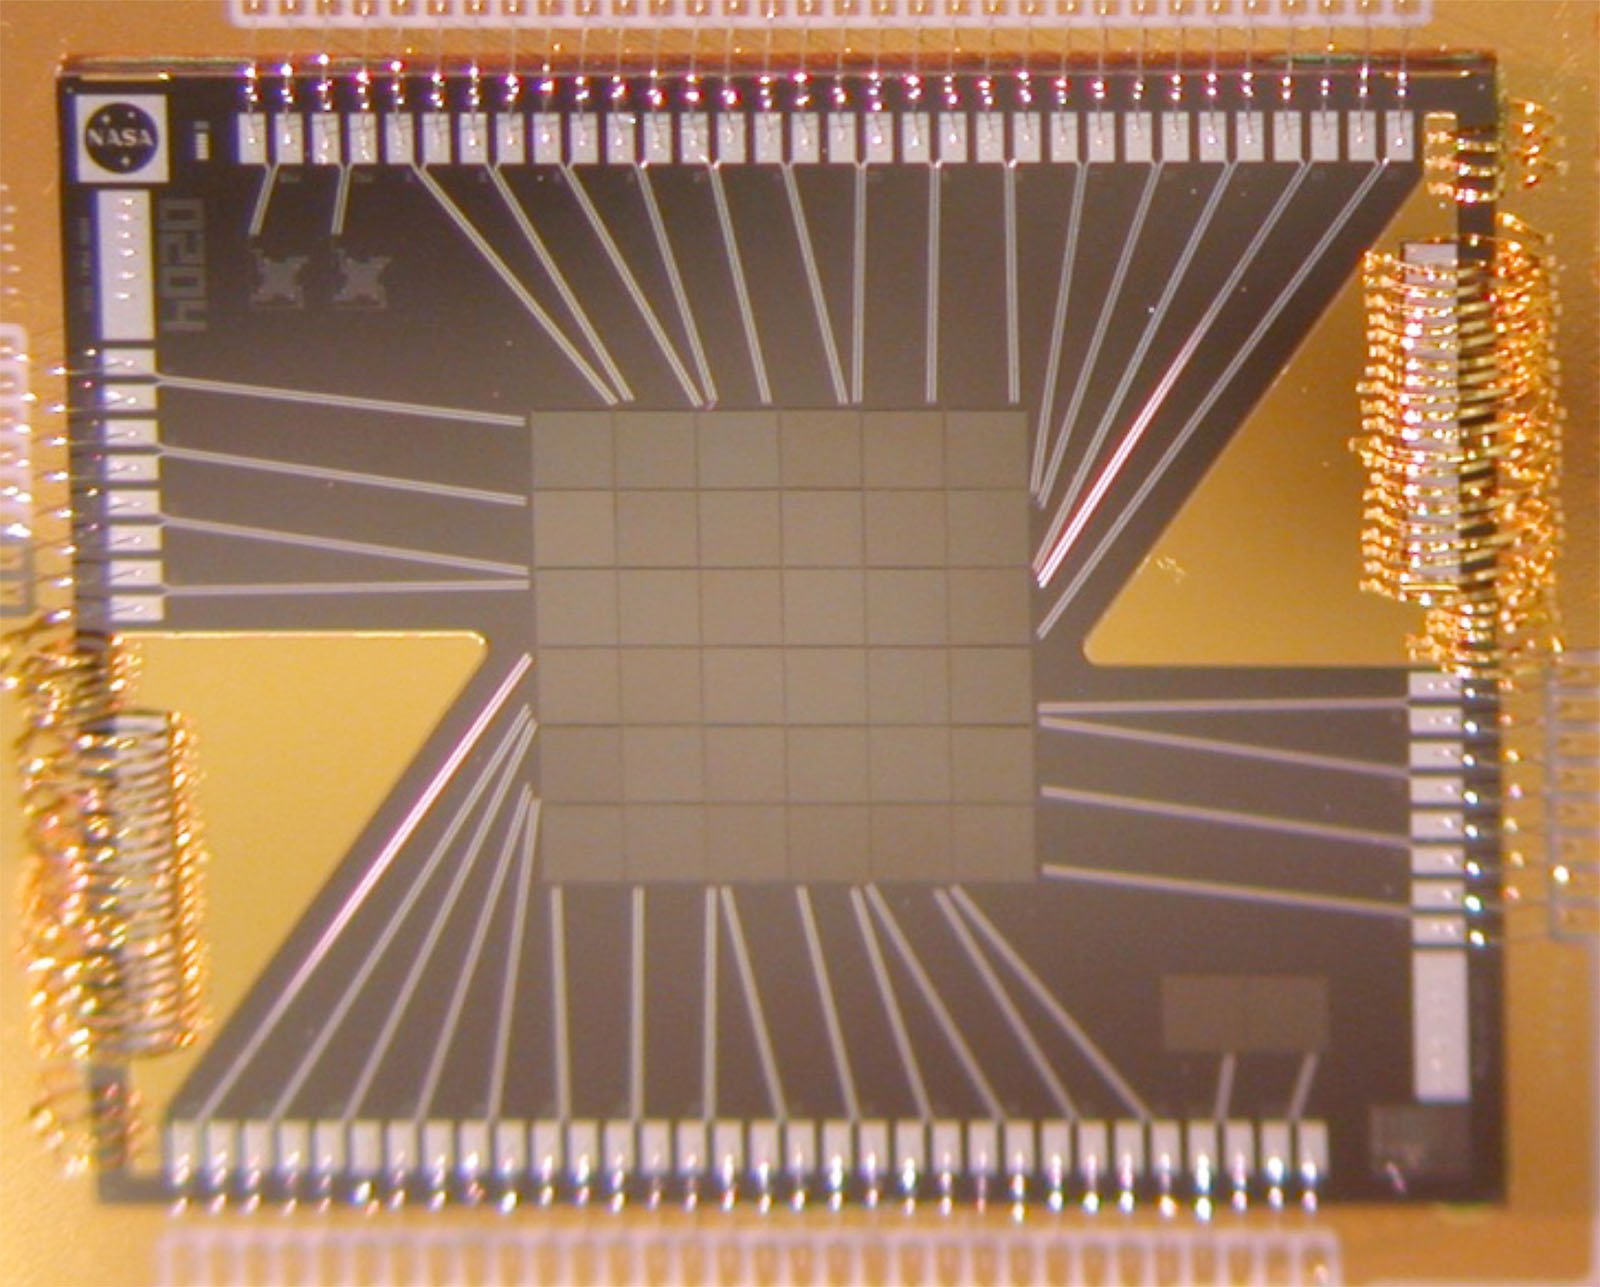 Close-up image of a microprocessor chip showing intricate patterns of circuits, connectors, and a central grid-like structure, mounted on a board with labeling.